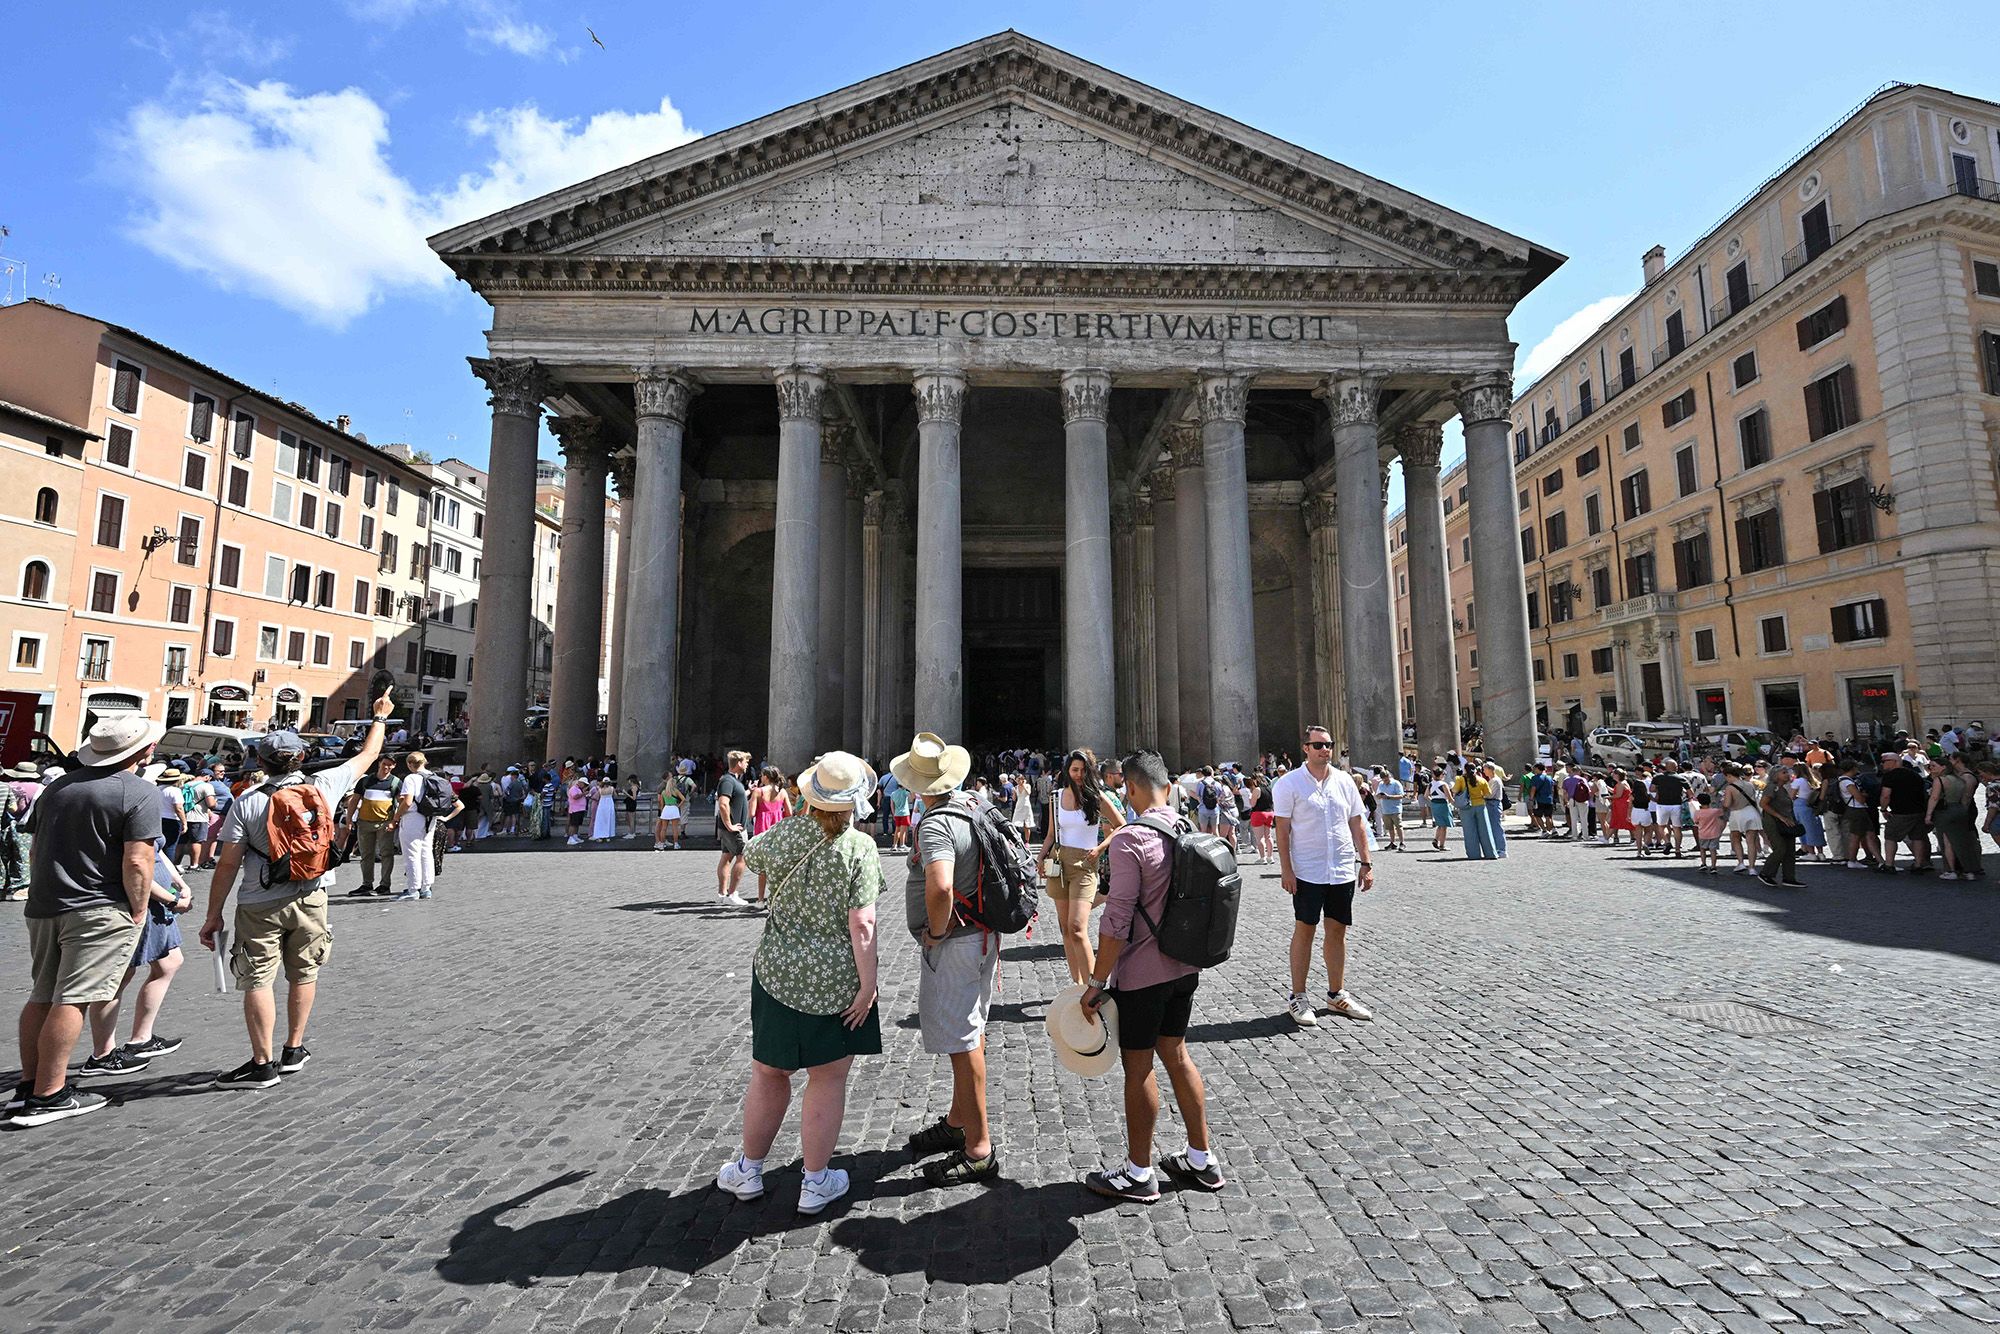 A view of the Pantheon on July 3, 2023 in Rome. From today the visit to the most visited cultural site in Italy with 9 million visitors a year is subject to a fee and the cost of the ticket is 5 euros but remains free for residents of Rome. From today the visit to the most visited cultural site in Italy with 9 million visitors a year is subject to a fee and the cost of the ticket is 5 euros but remains free for residents of Rome. (Photo by Alberto PIZZOLI / AFP) (Photo by ALBERTO PIZZOLI/AFP via Getty Images)